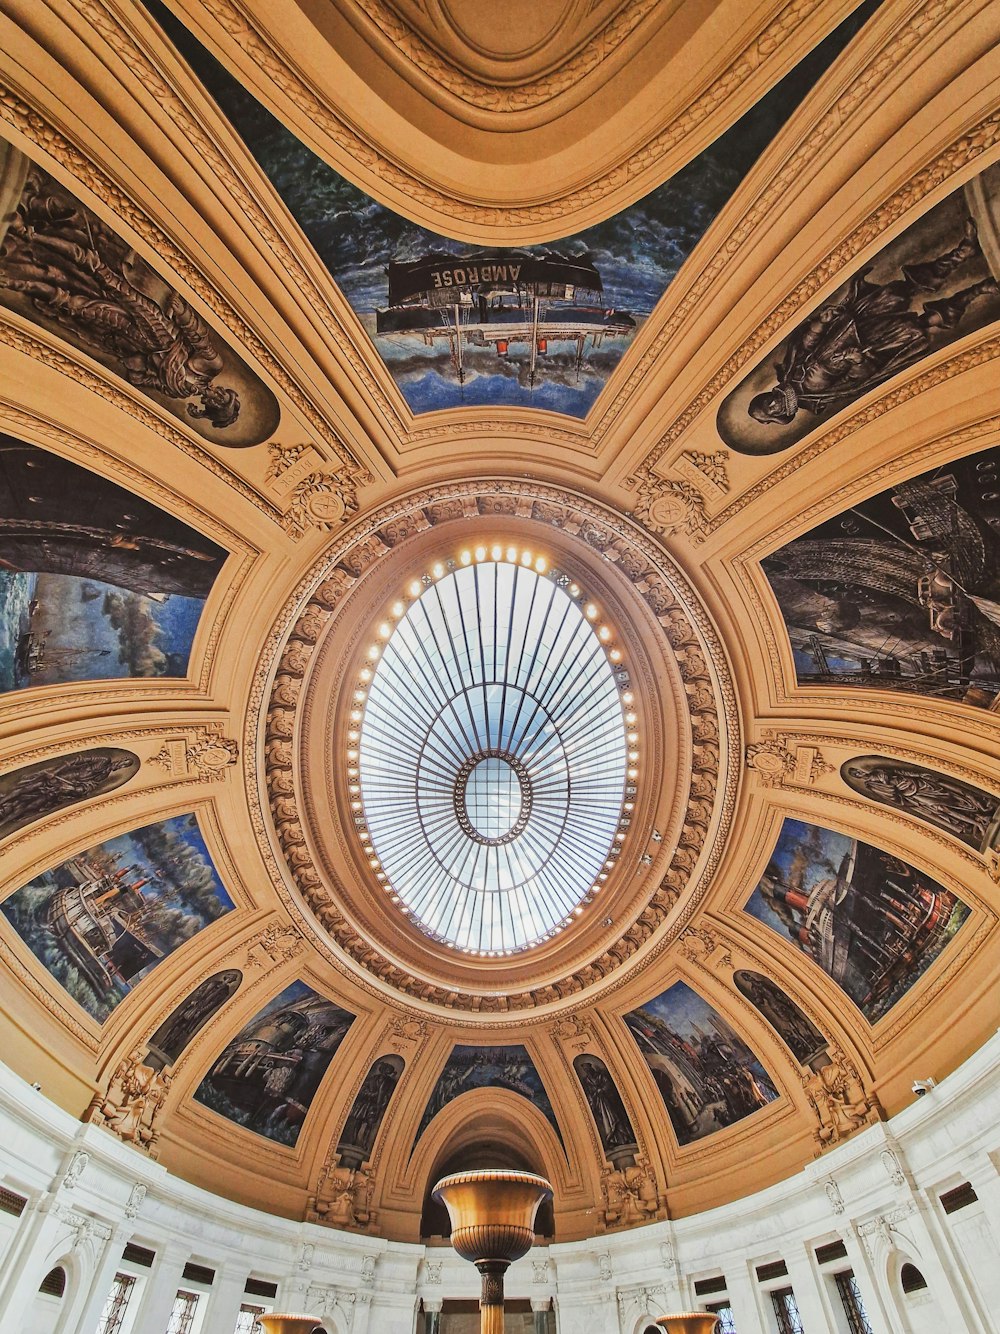 the ceiling of a building with a dome and paintings on it